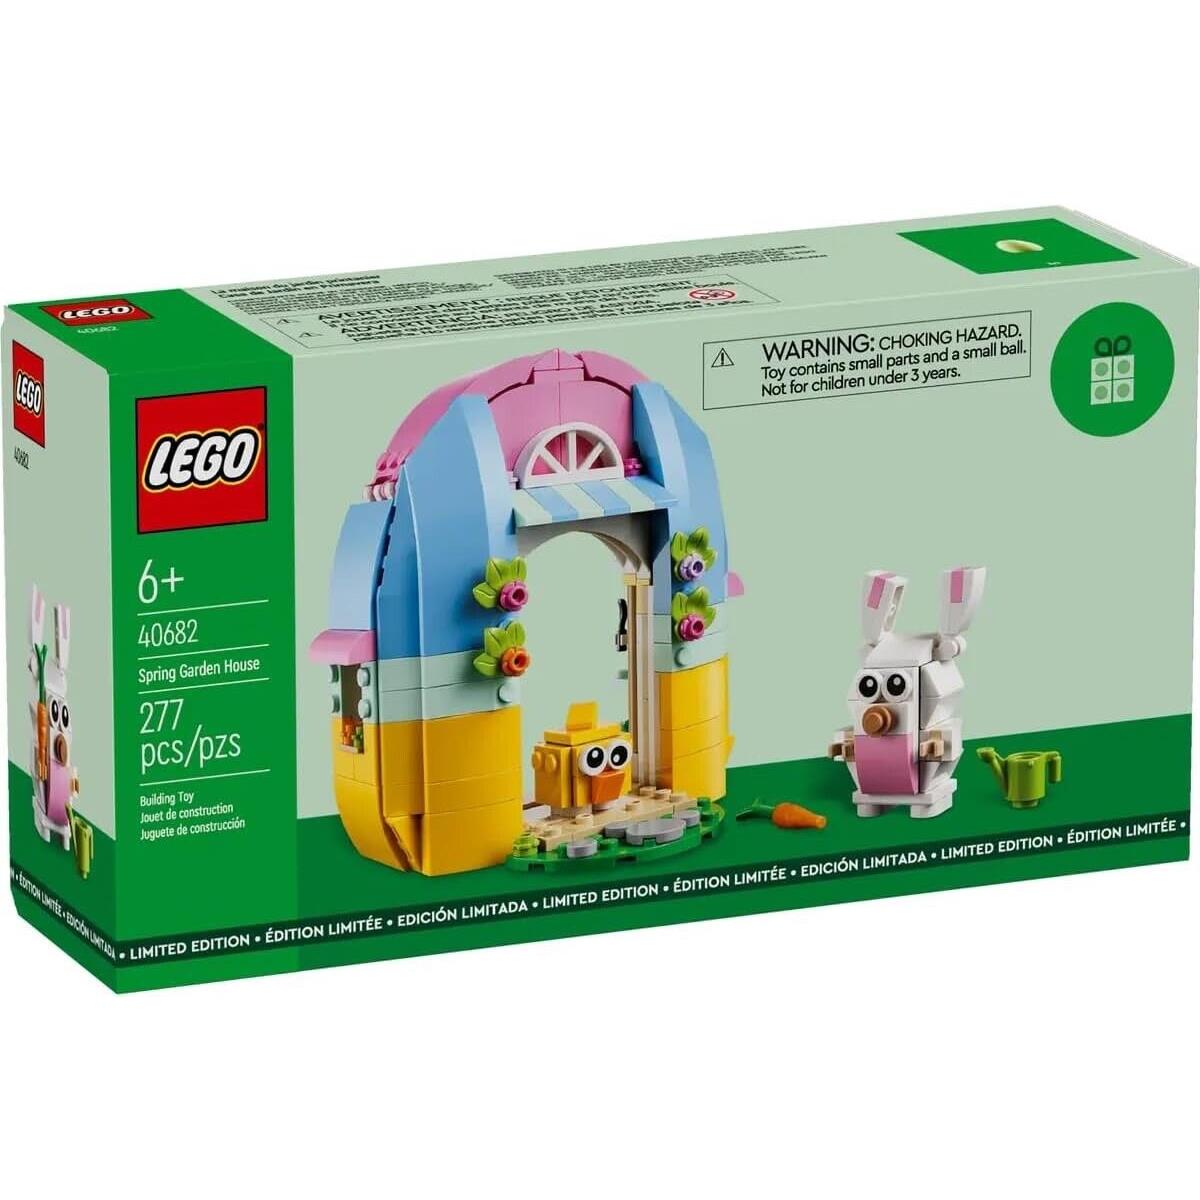 Lego Seasonal Easter Spring Garden House with Bunny Chick Toy Set 277 Pcs